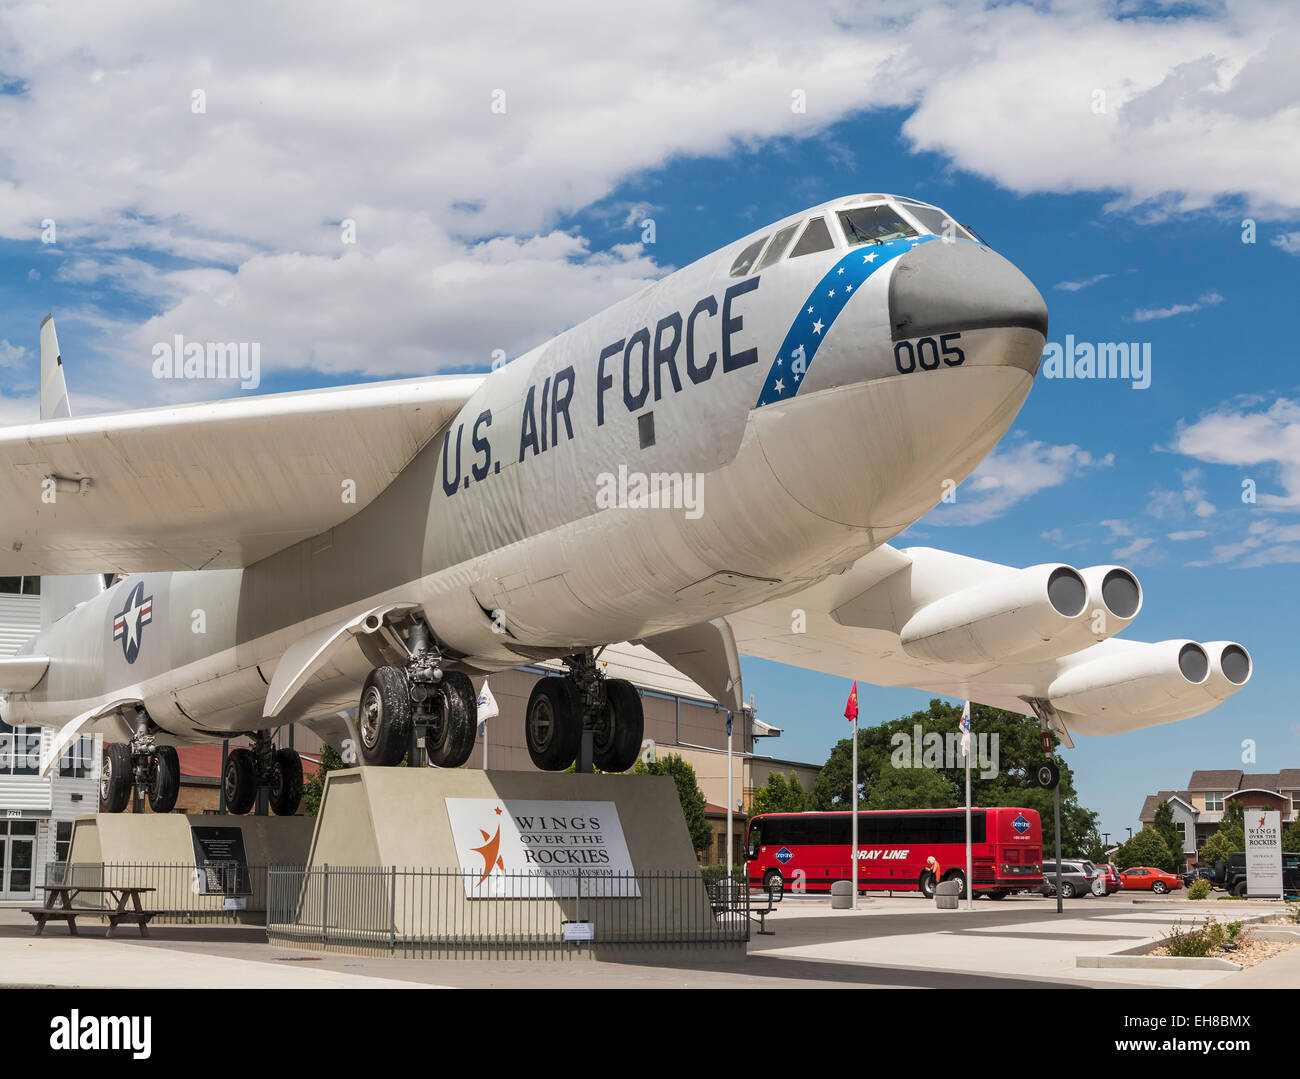 A B52 Bomber aircraft on display outside 'Wings Over the Rockies' Air & Space Museum, Denver, Colorado, USA Stock Photo